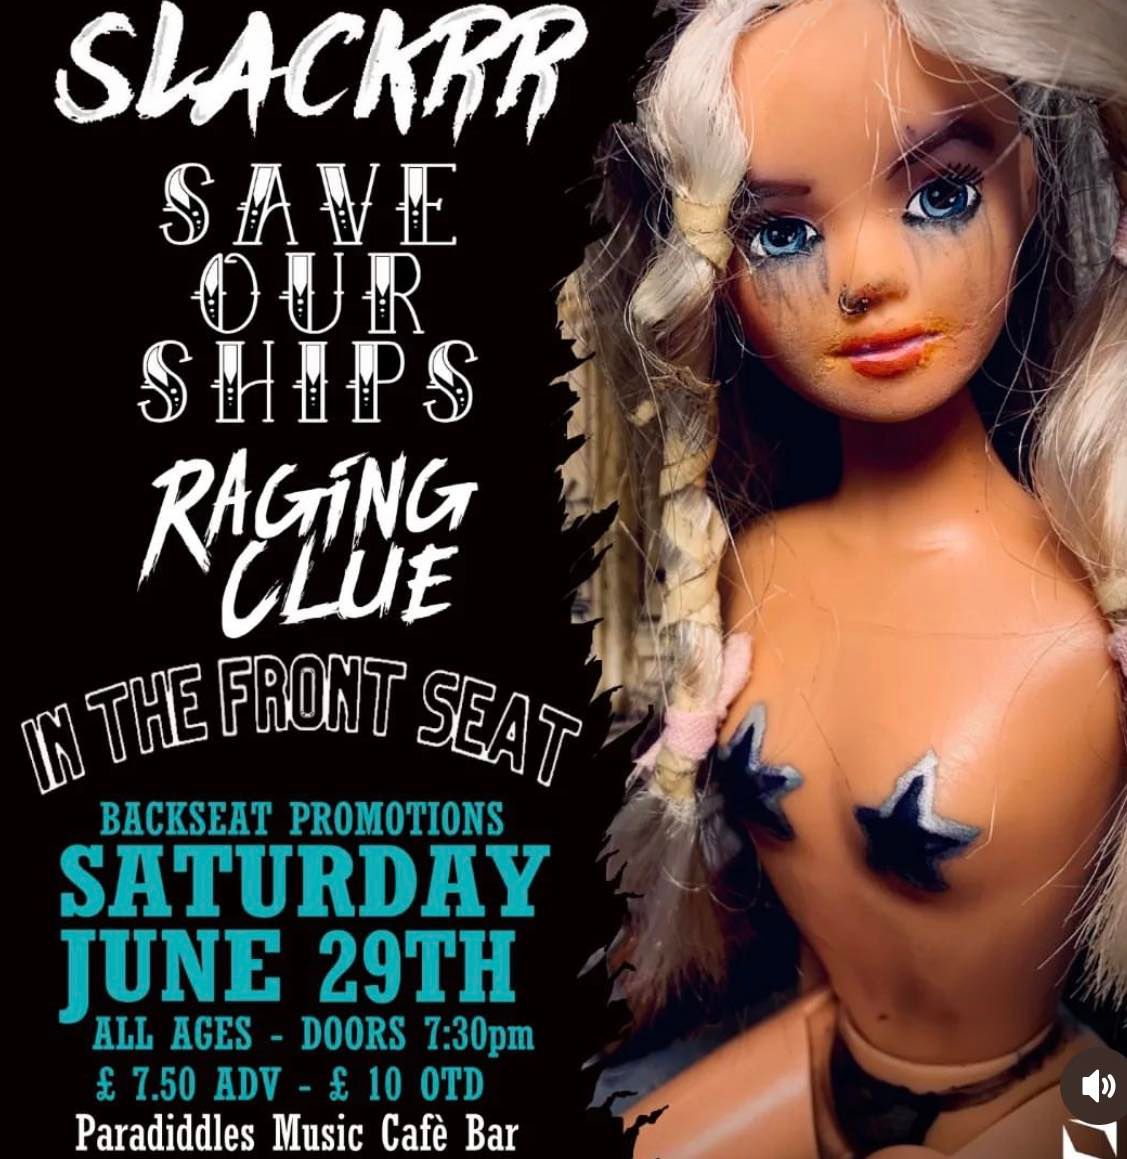 Back Seat Promotions Presents Slackrr \/ Save our Ships \/ Raging Clue